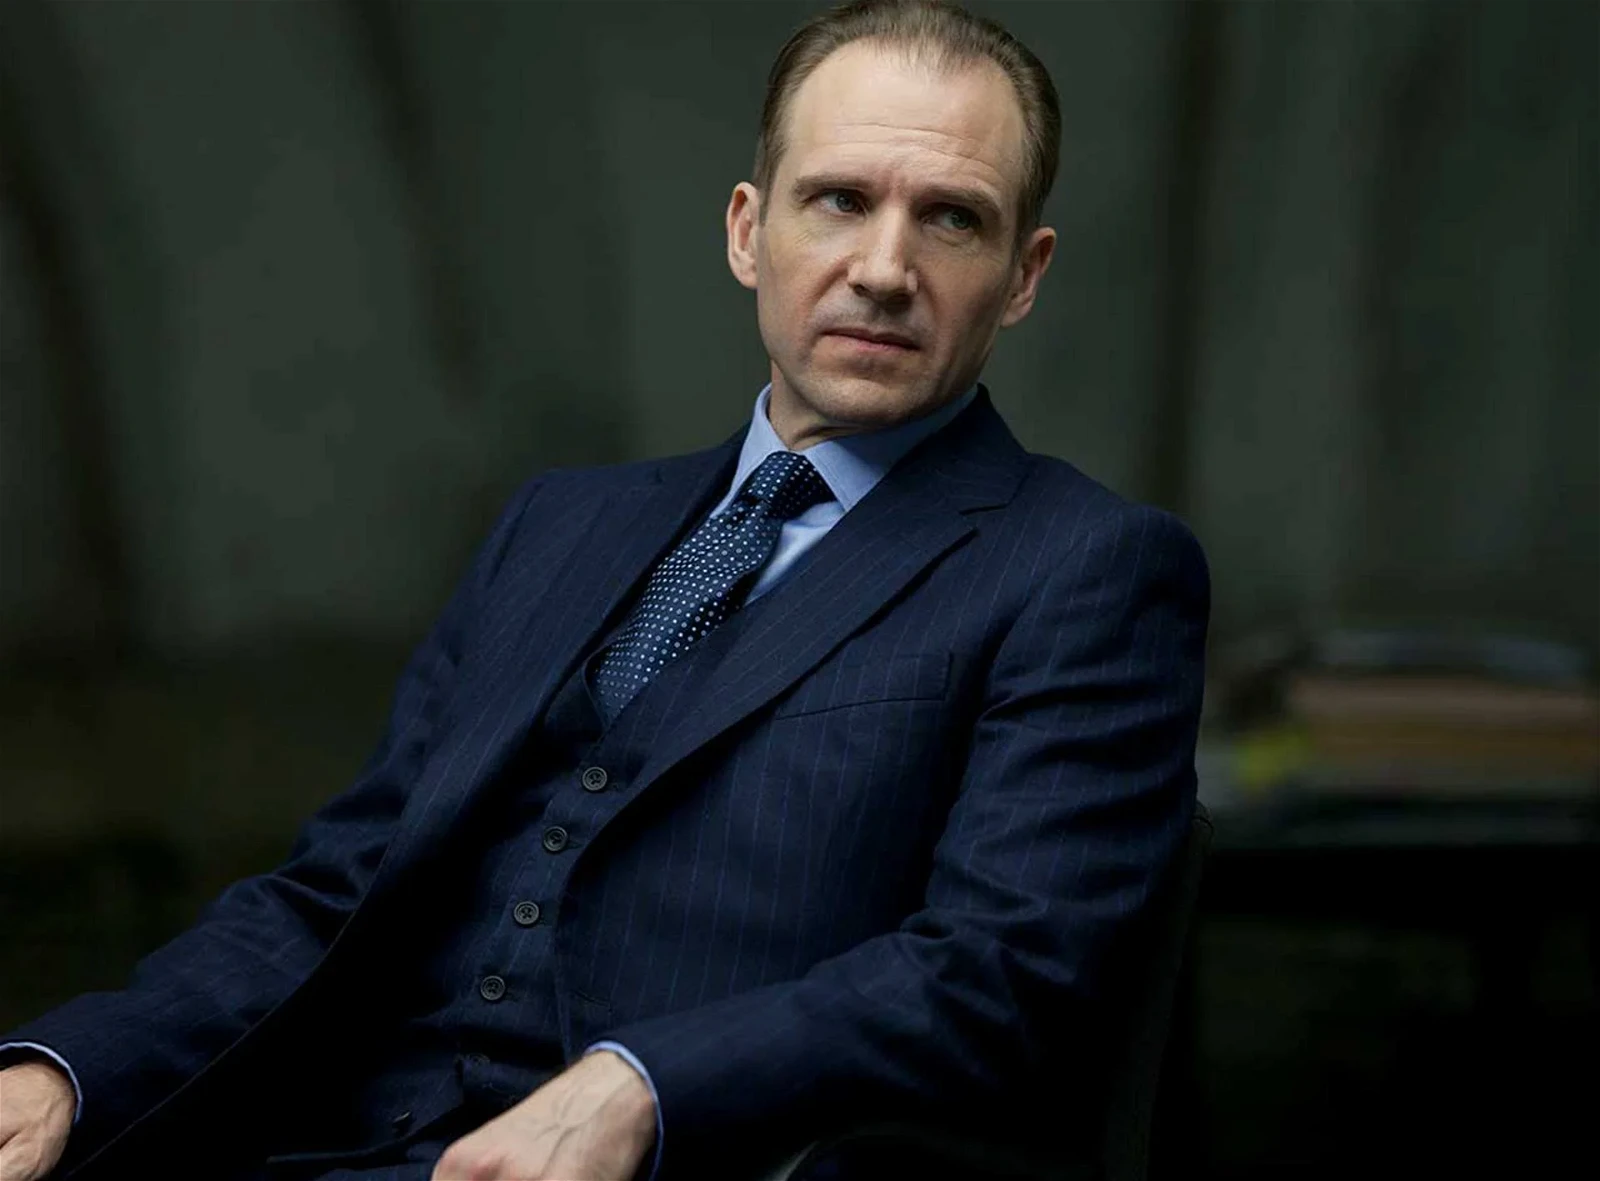 Ralph Fiennes as M in the 007 franchise